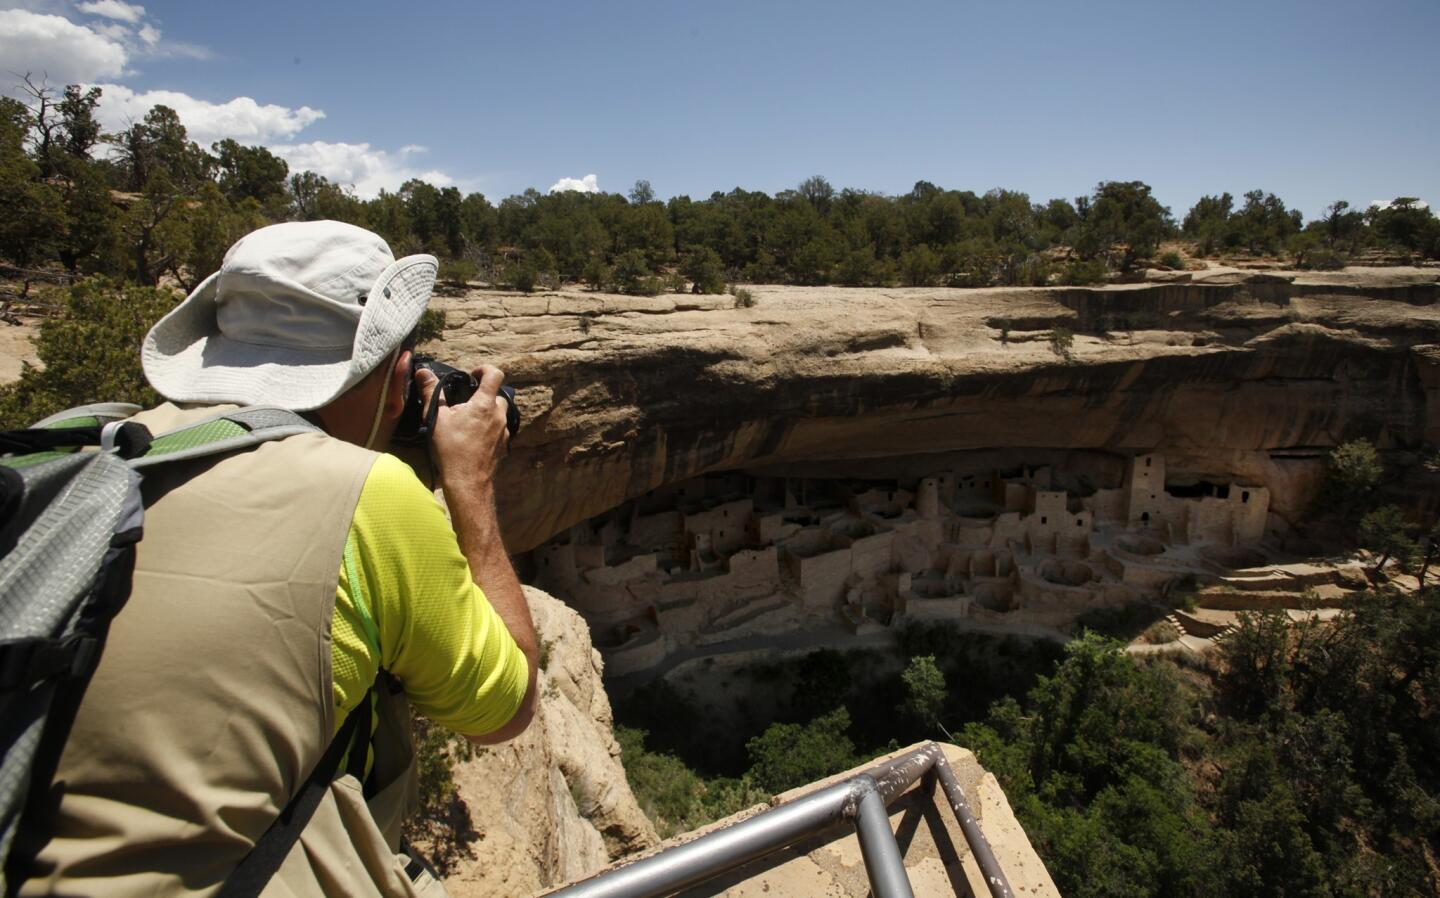 Another must-see attraction when you're in southwestern Colorado is Mesa Verde National Park. About a 90-minute drive from Durango, the park contains more than 4,500 archaeological sites, such as Cliff Palace, pictured here.